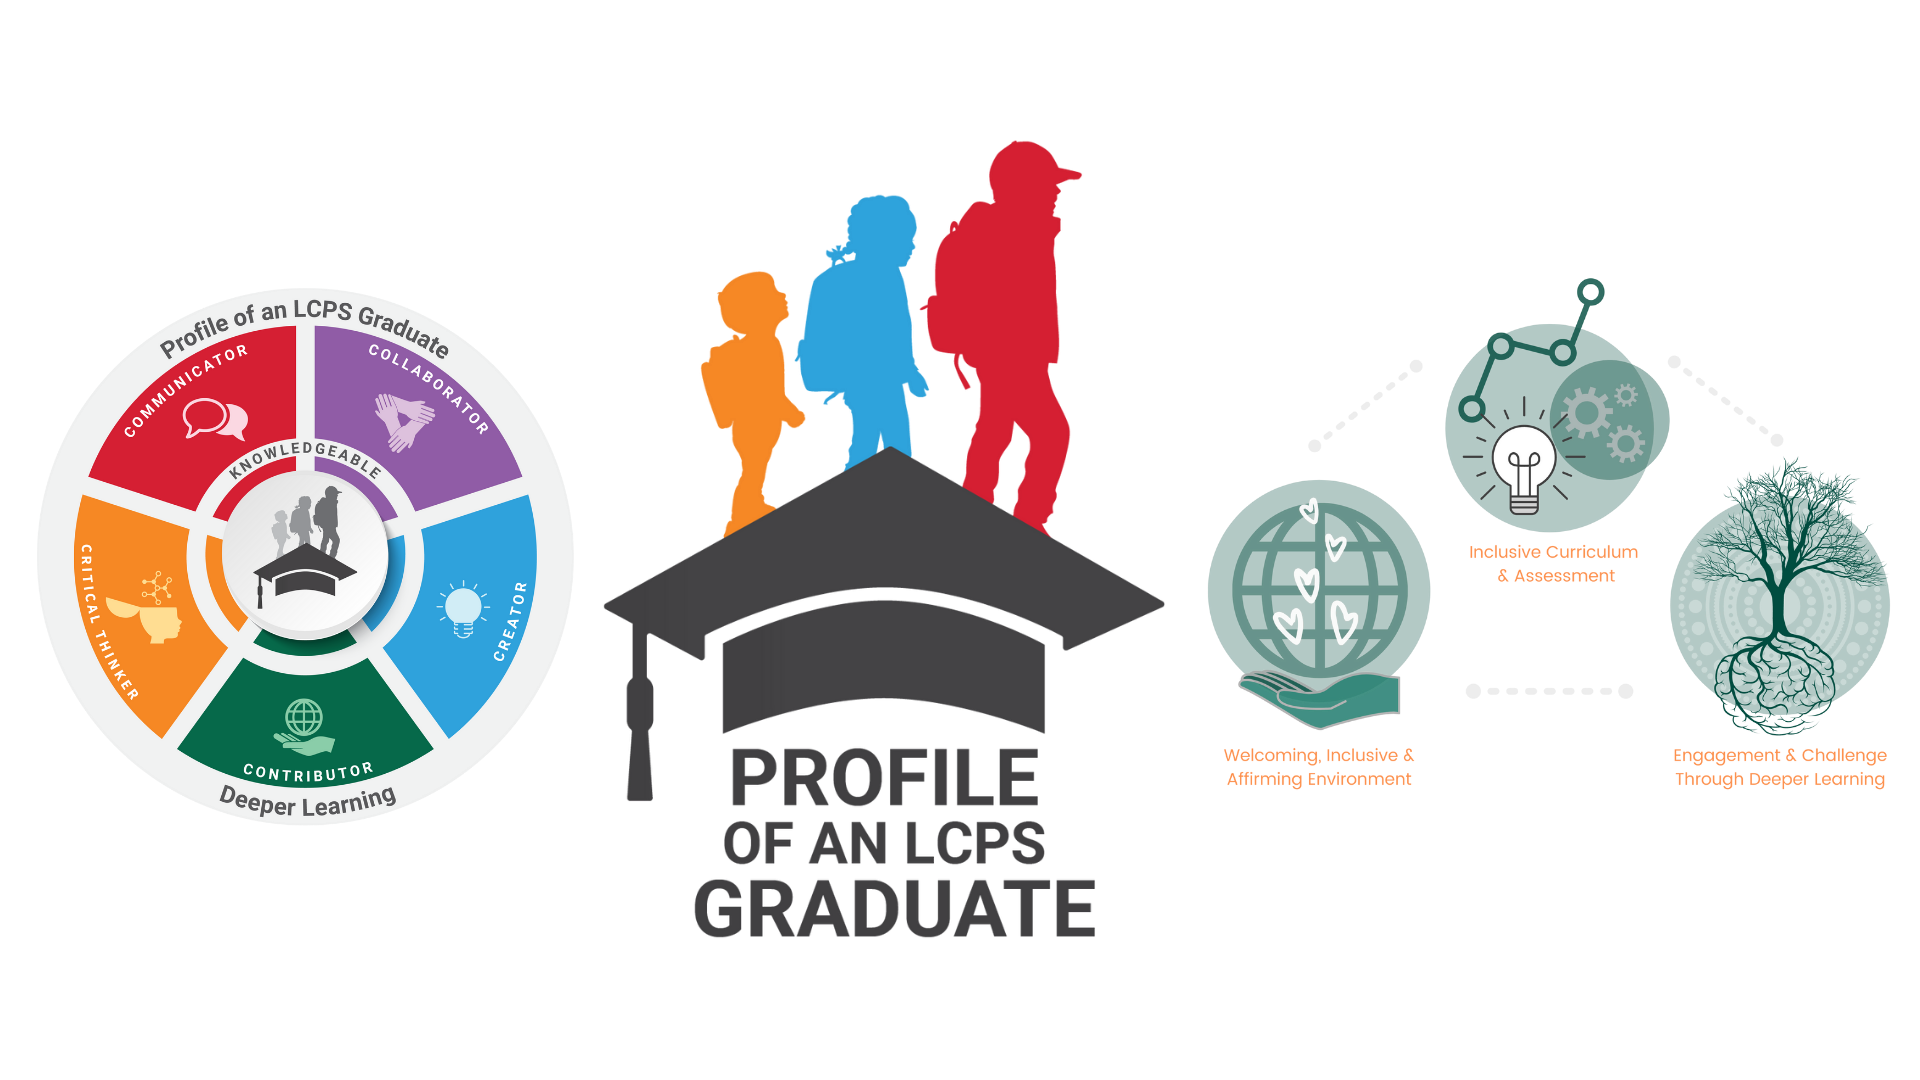 Profile of an LCPS Graduate